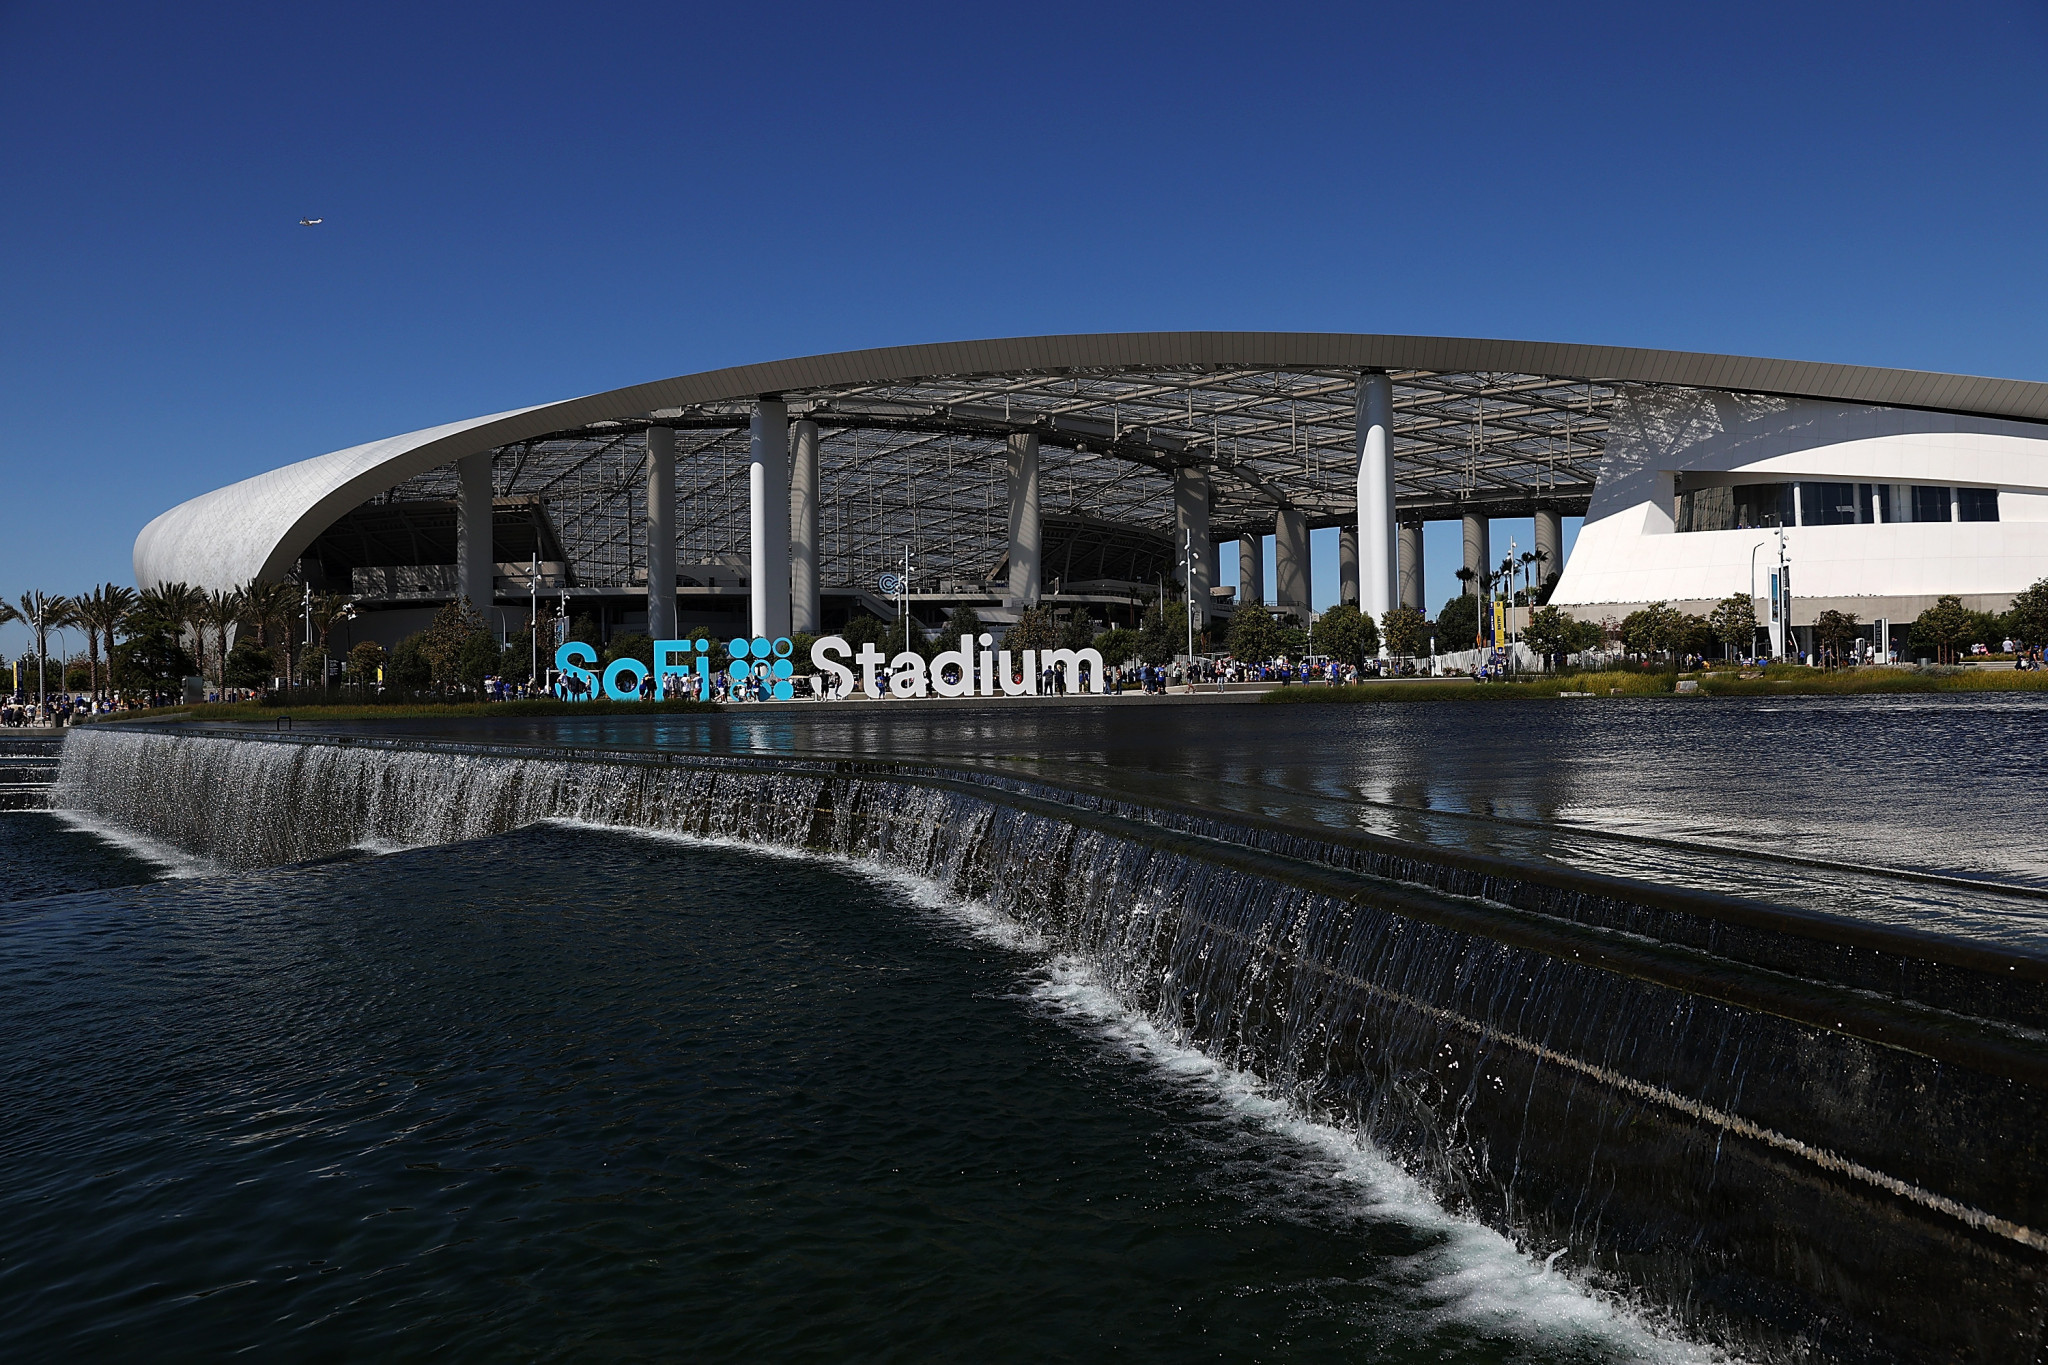 SoFi Stadium owners threaten to pull out of 2026 FIFA World Cup, it is claimed